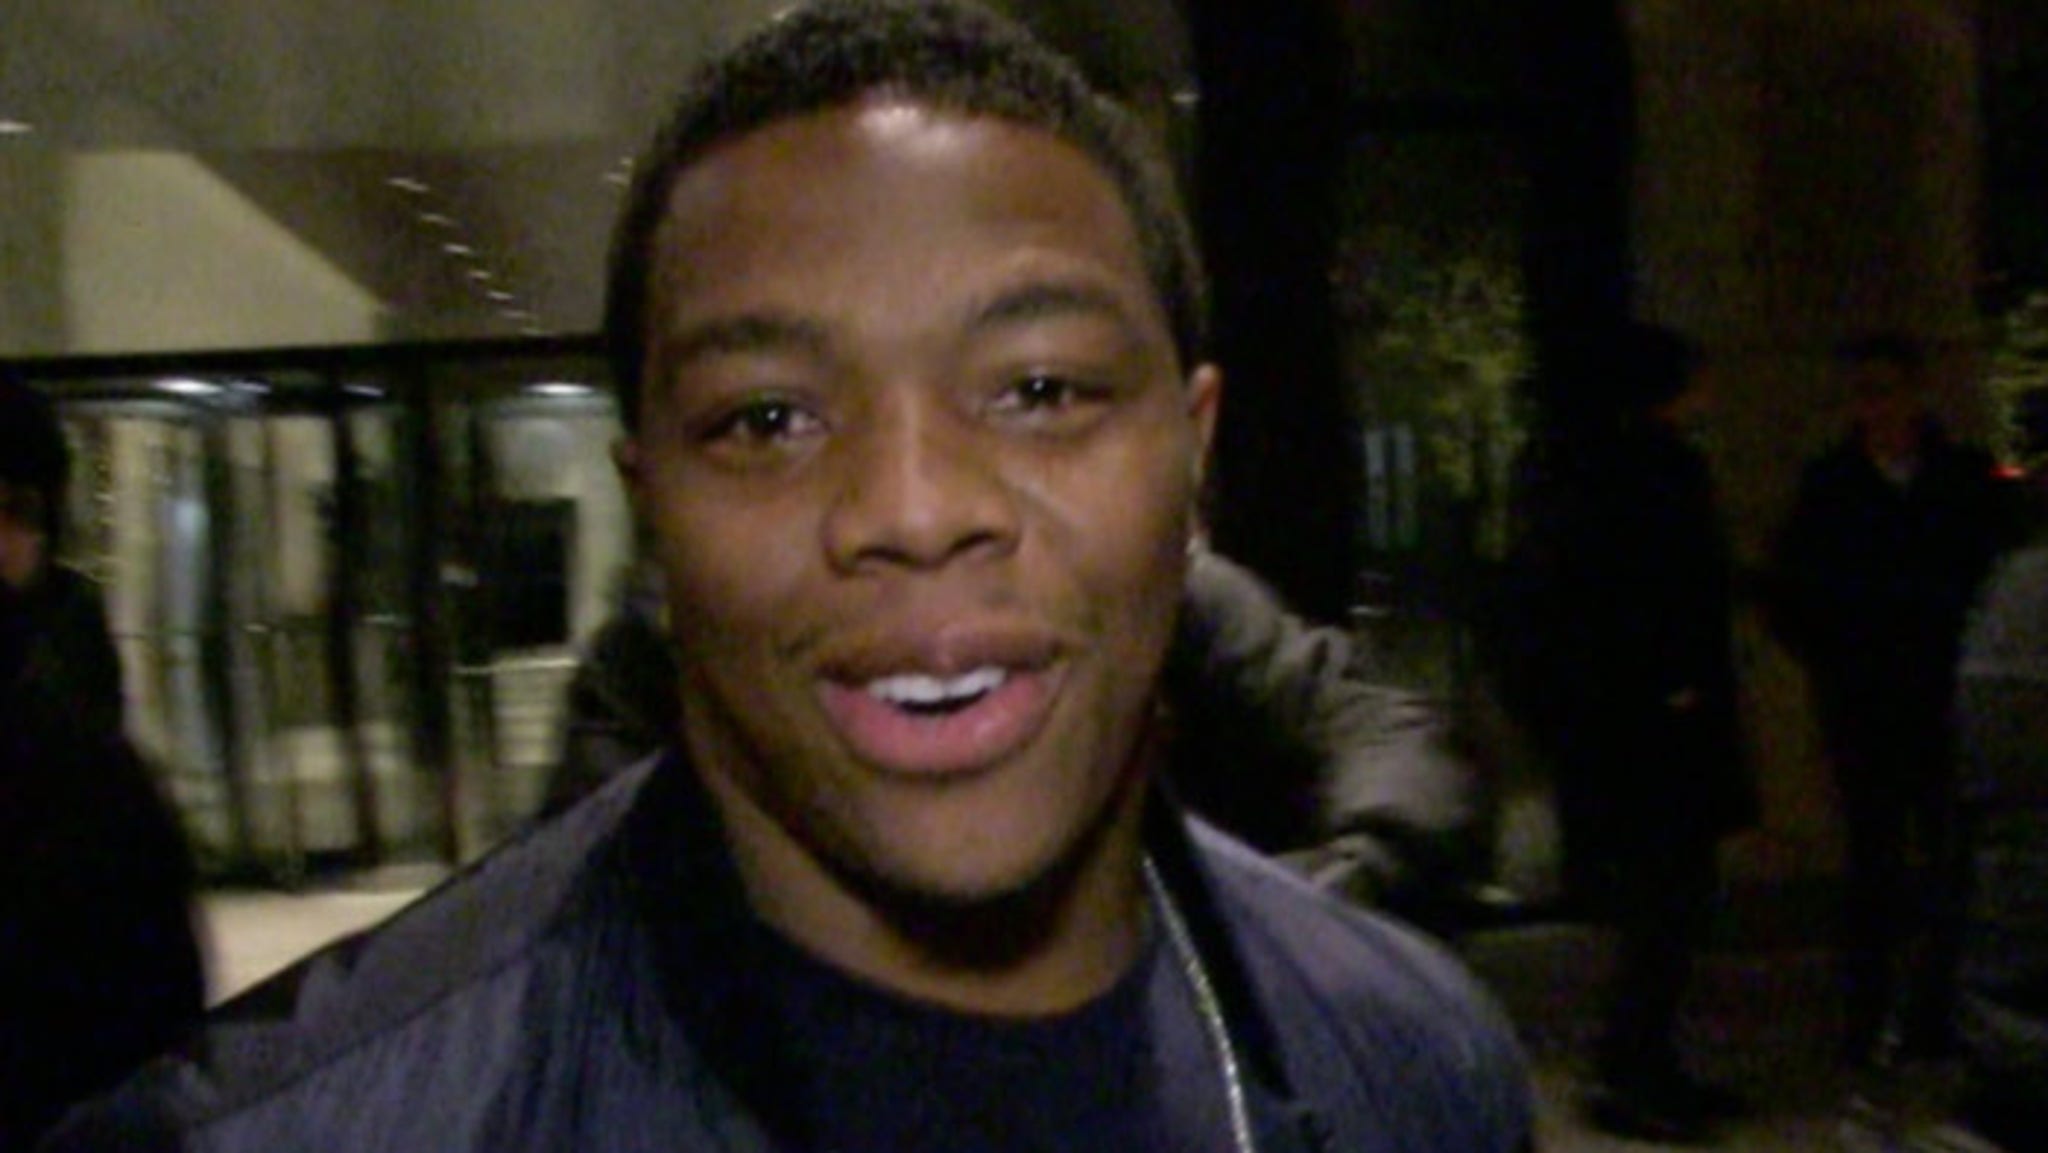 Ray Rice Wins Appeal Nfl Indefinite Suspension Overturned 